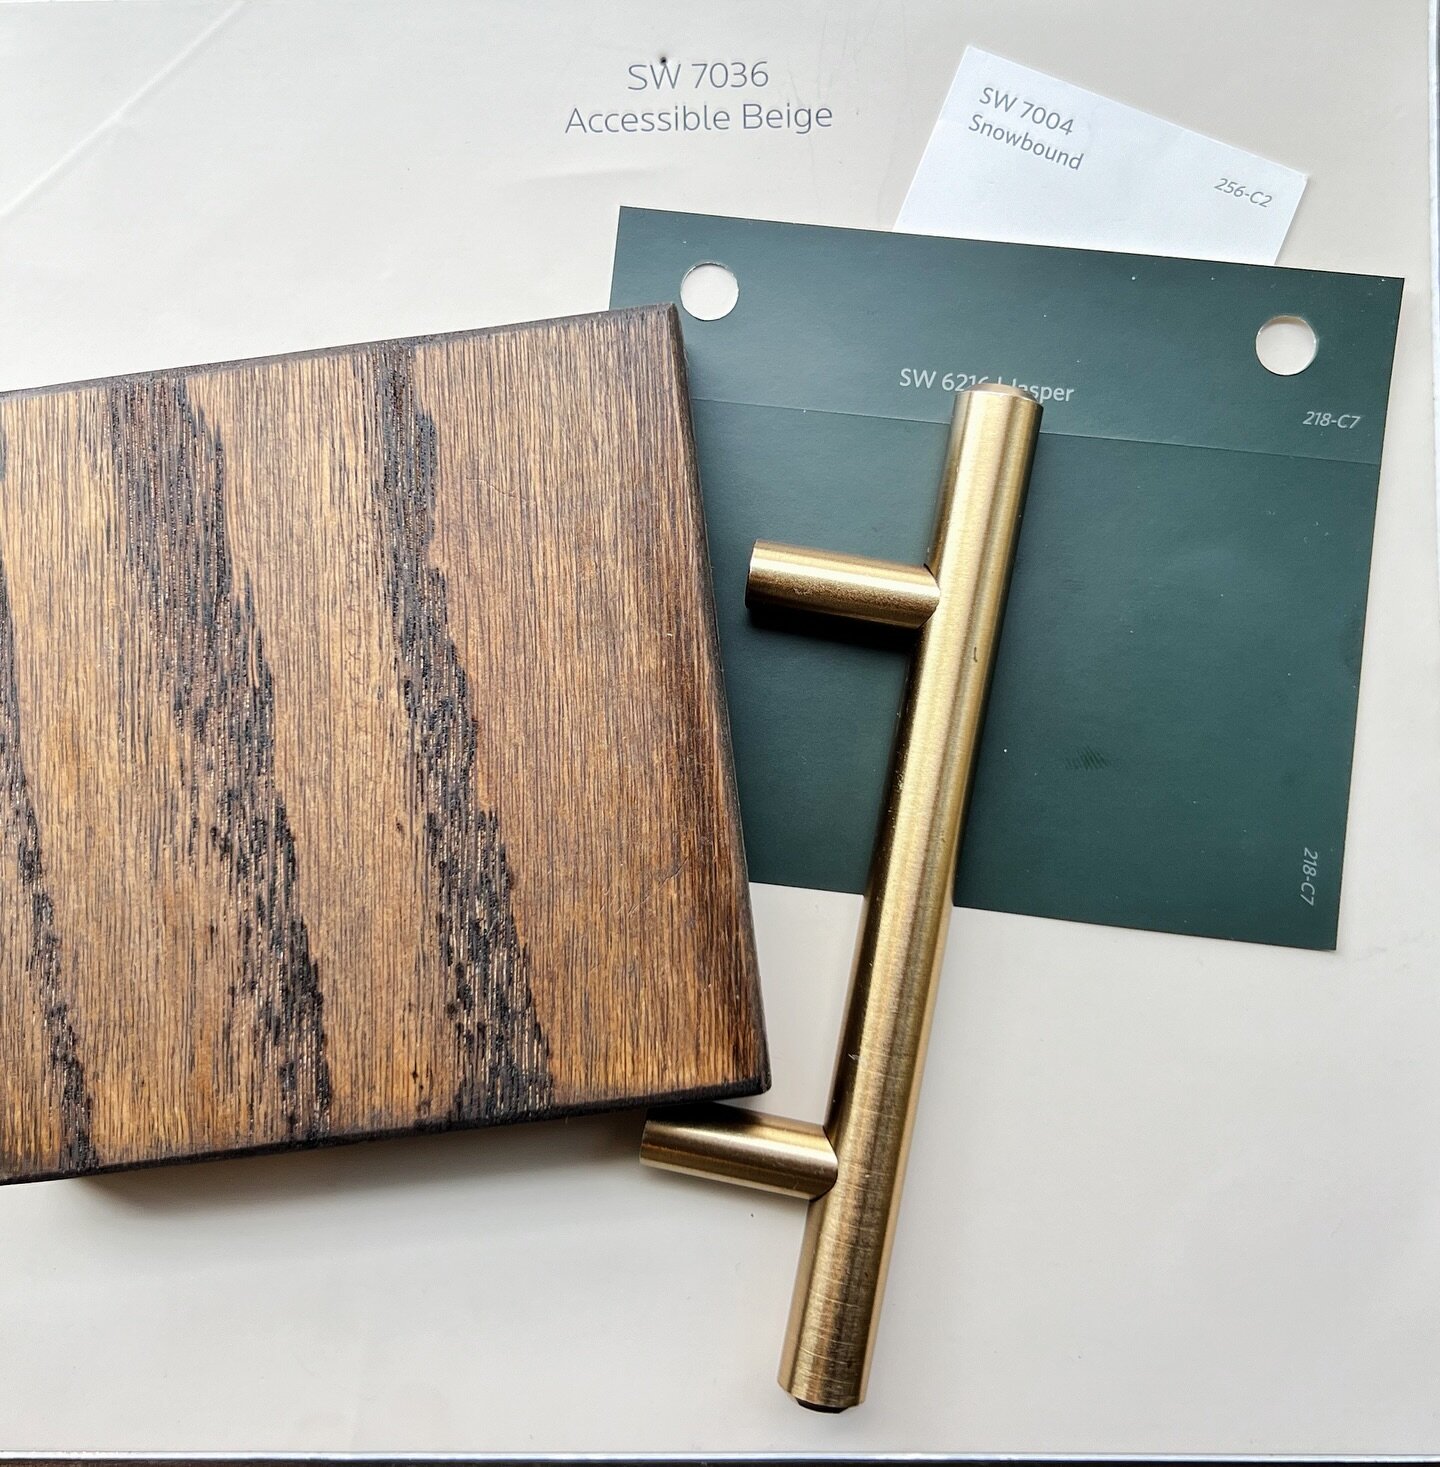 It may be April Fool&rsquo;s Day, but we don&rsquo;t joke about how much we love this flat lay. This dreamy combo of @sherwinwilliams Jasper cabinets, satin bronze (gold) hardware, rich wood tones and neutral walls is going to make this kitchen a stu